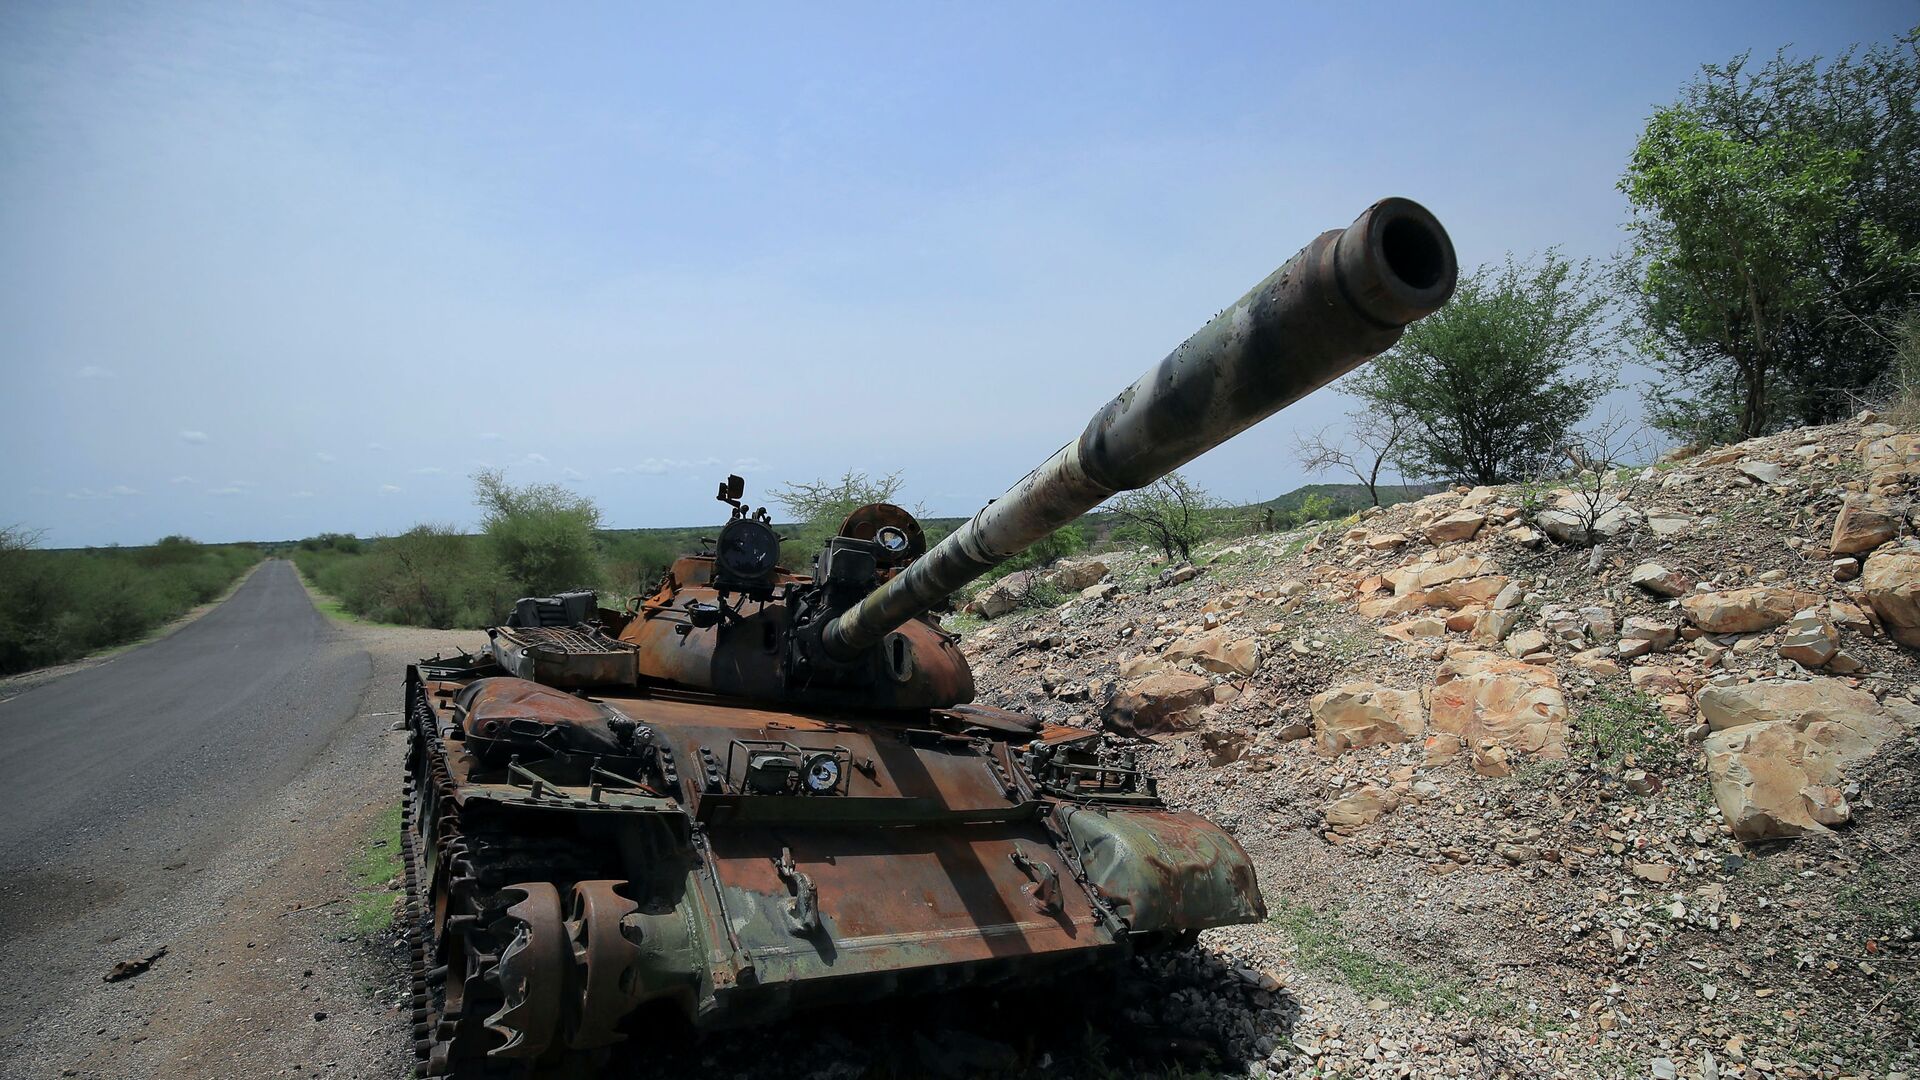 A tank damaged during the fighting between Ethiopia?s National Defense Force (ENDF) and Tigray Special Force stands on the outskirts of Humera town in Ethiopia July 1, 2021 Picture taken July 1, 2021 - Sputnik International, 1920, 25.11.2021